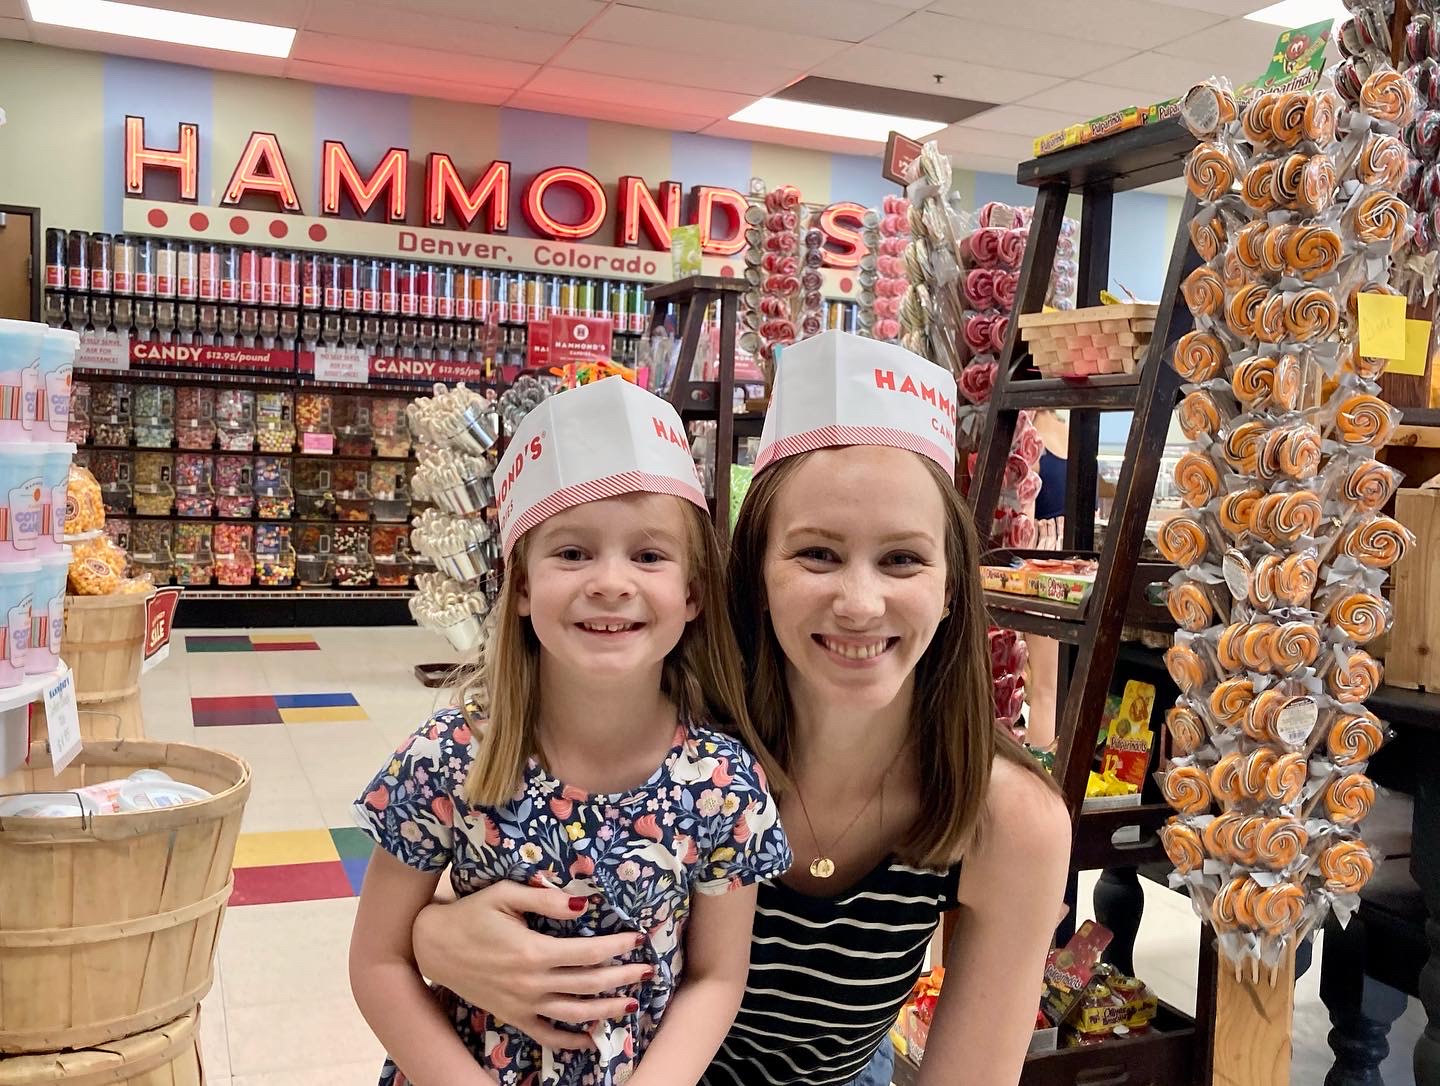 Mom and daughter at Hammond's Candy